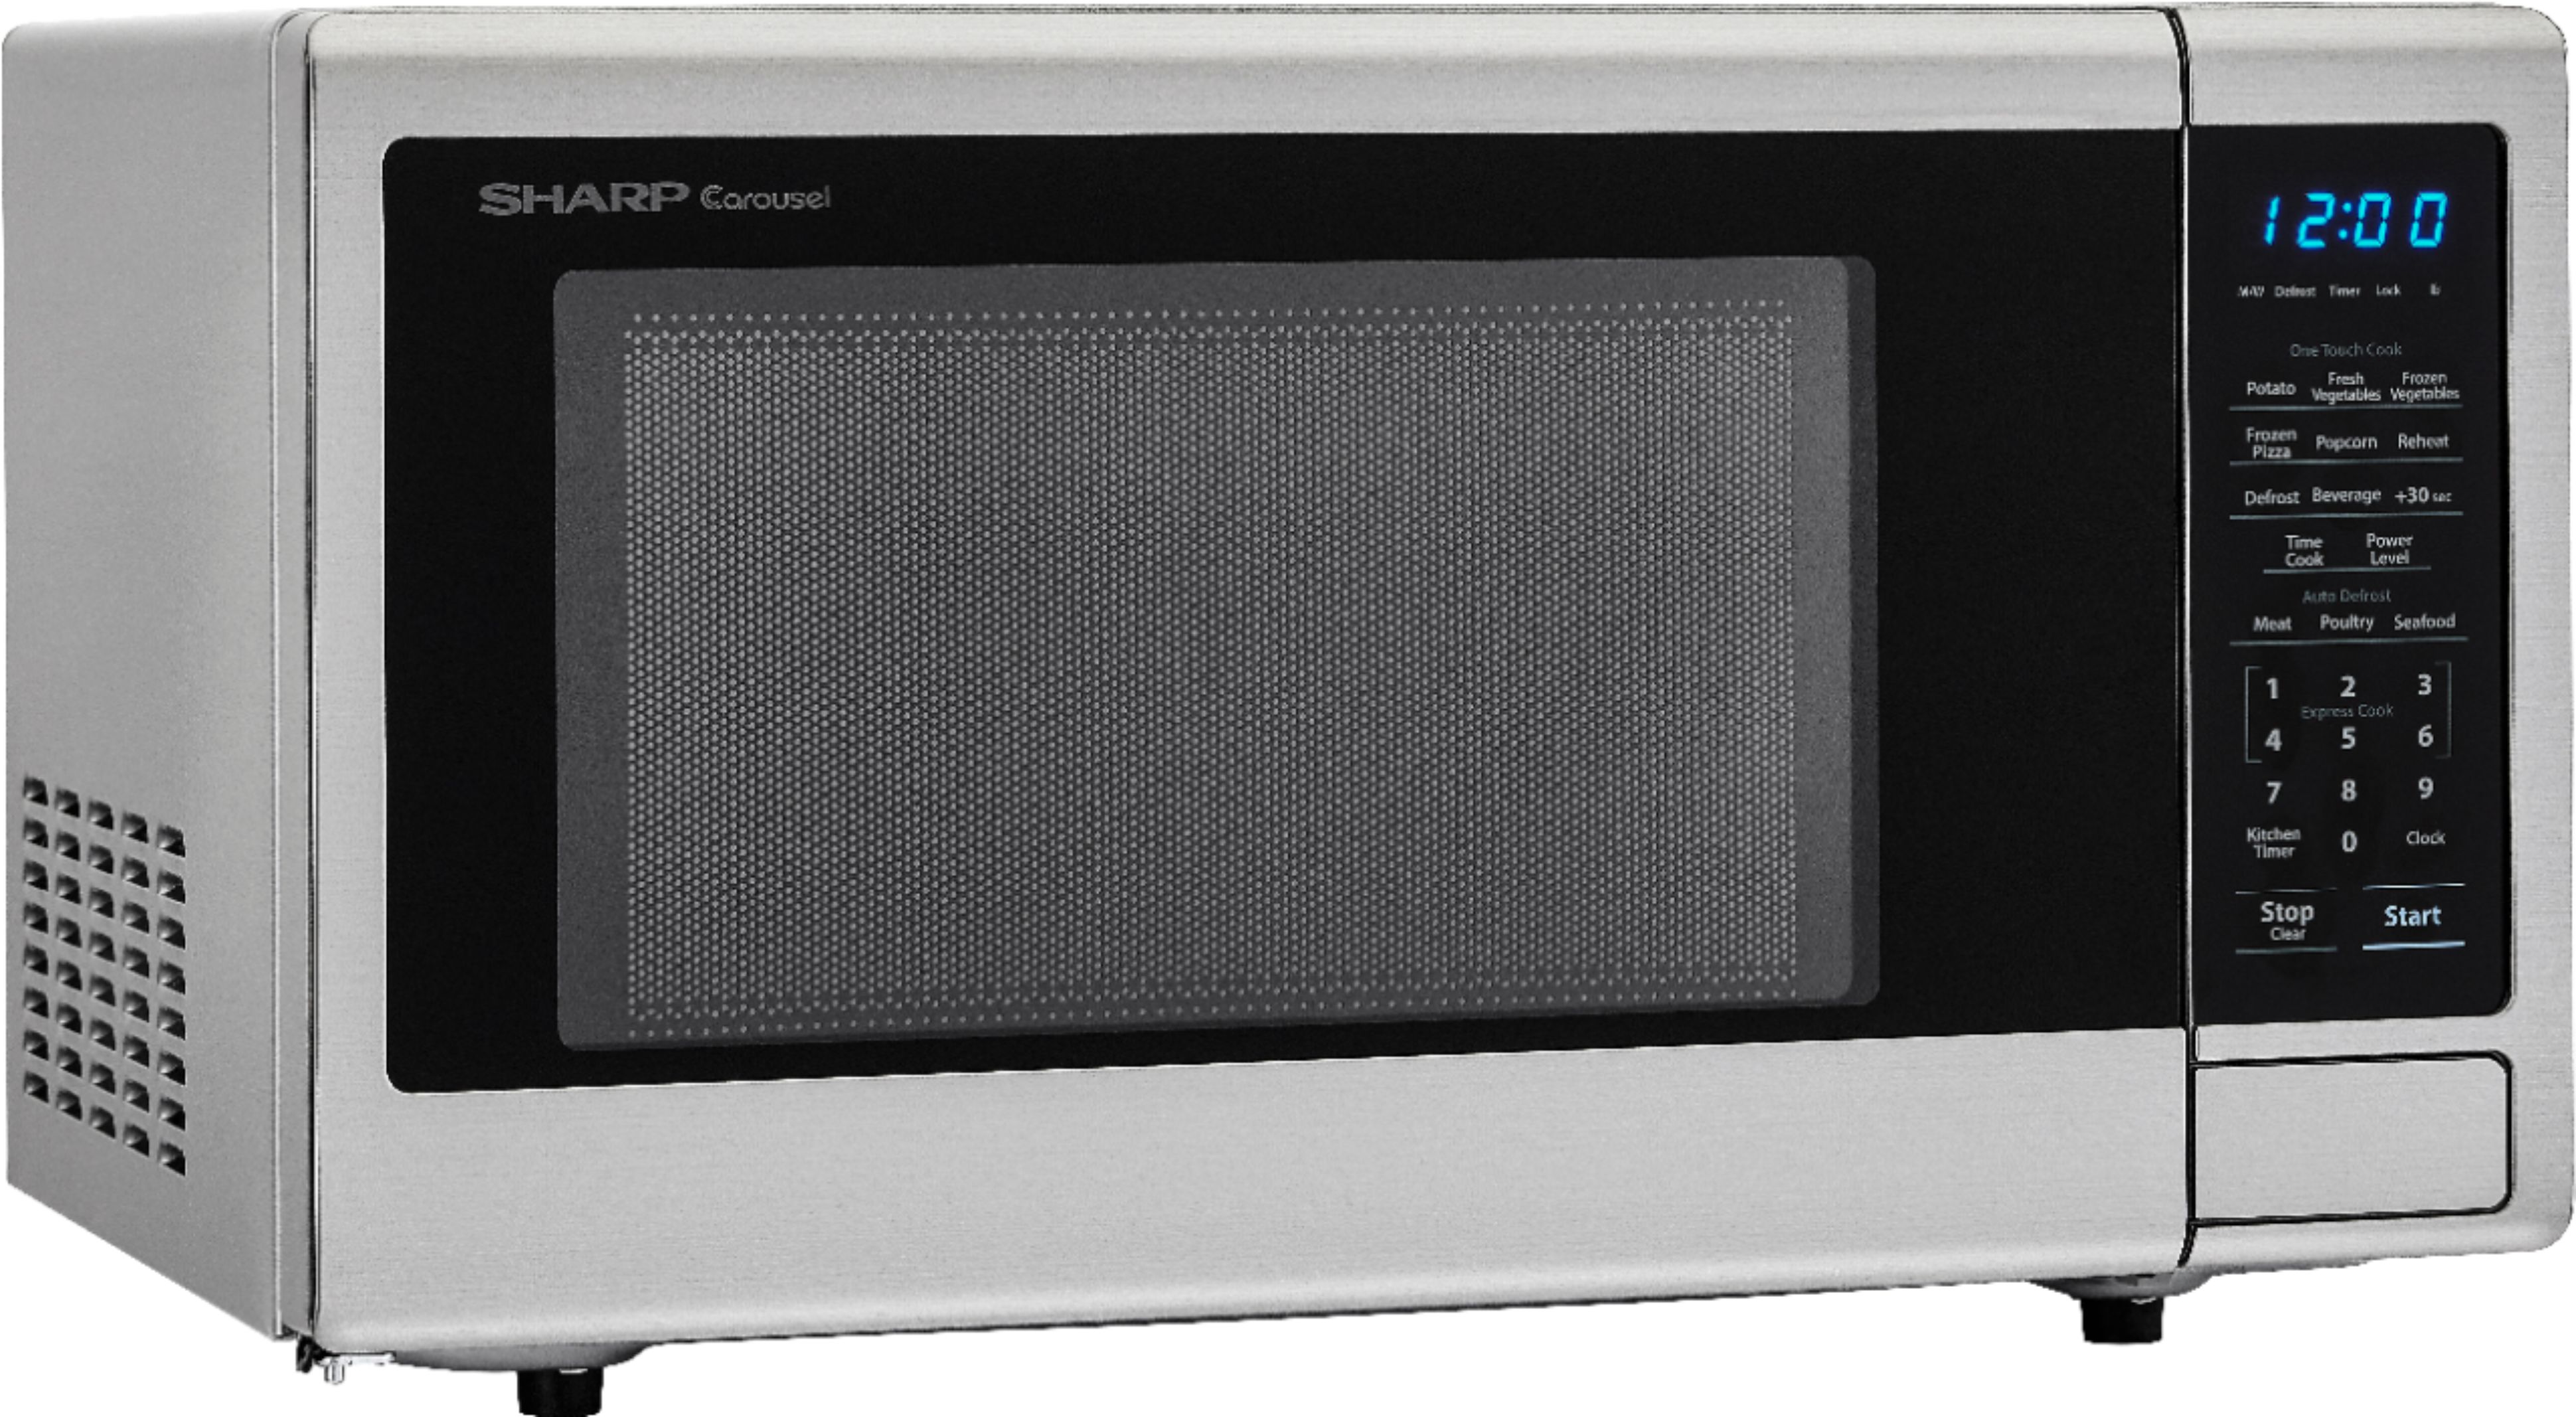 Angle View: Sharp - Carousel 1.5 Cu. Ft. Mid-Size Microwave - Silver